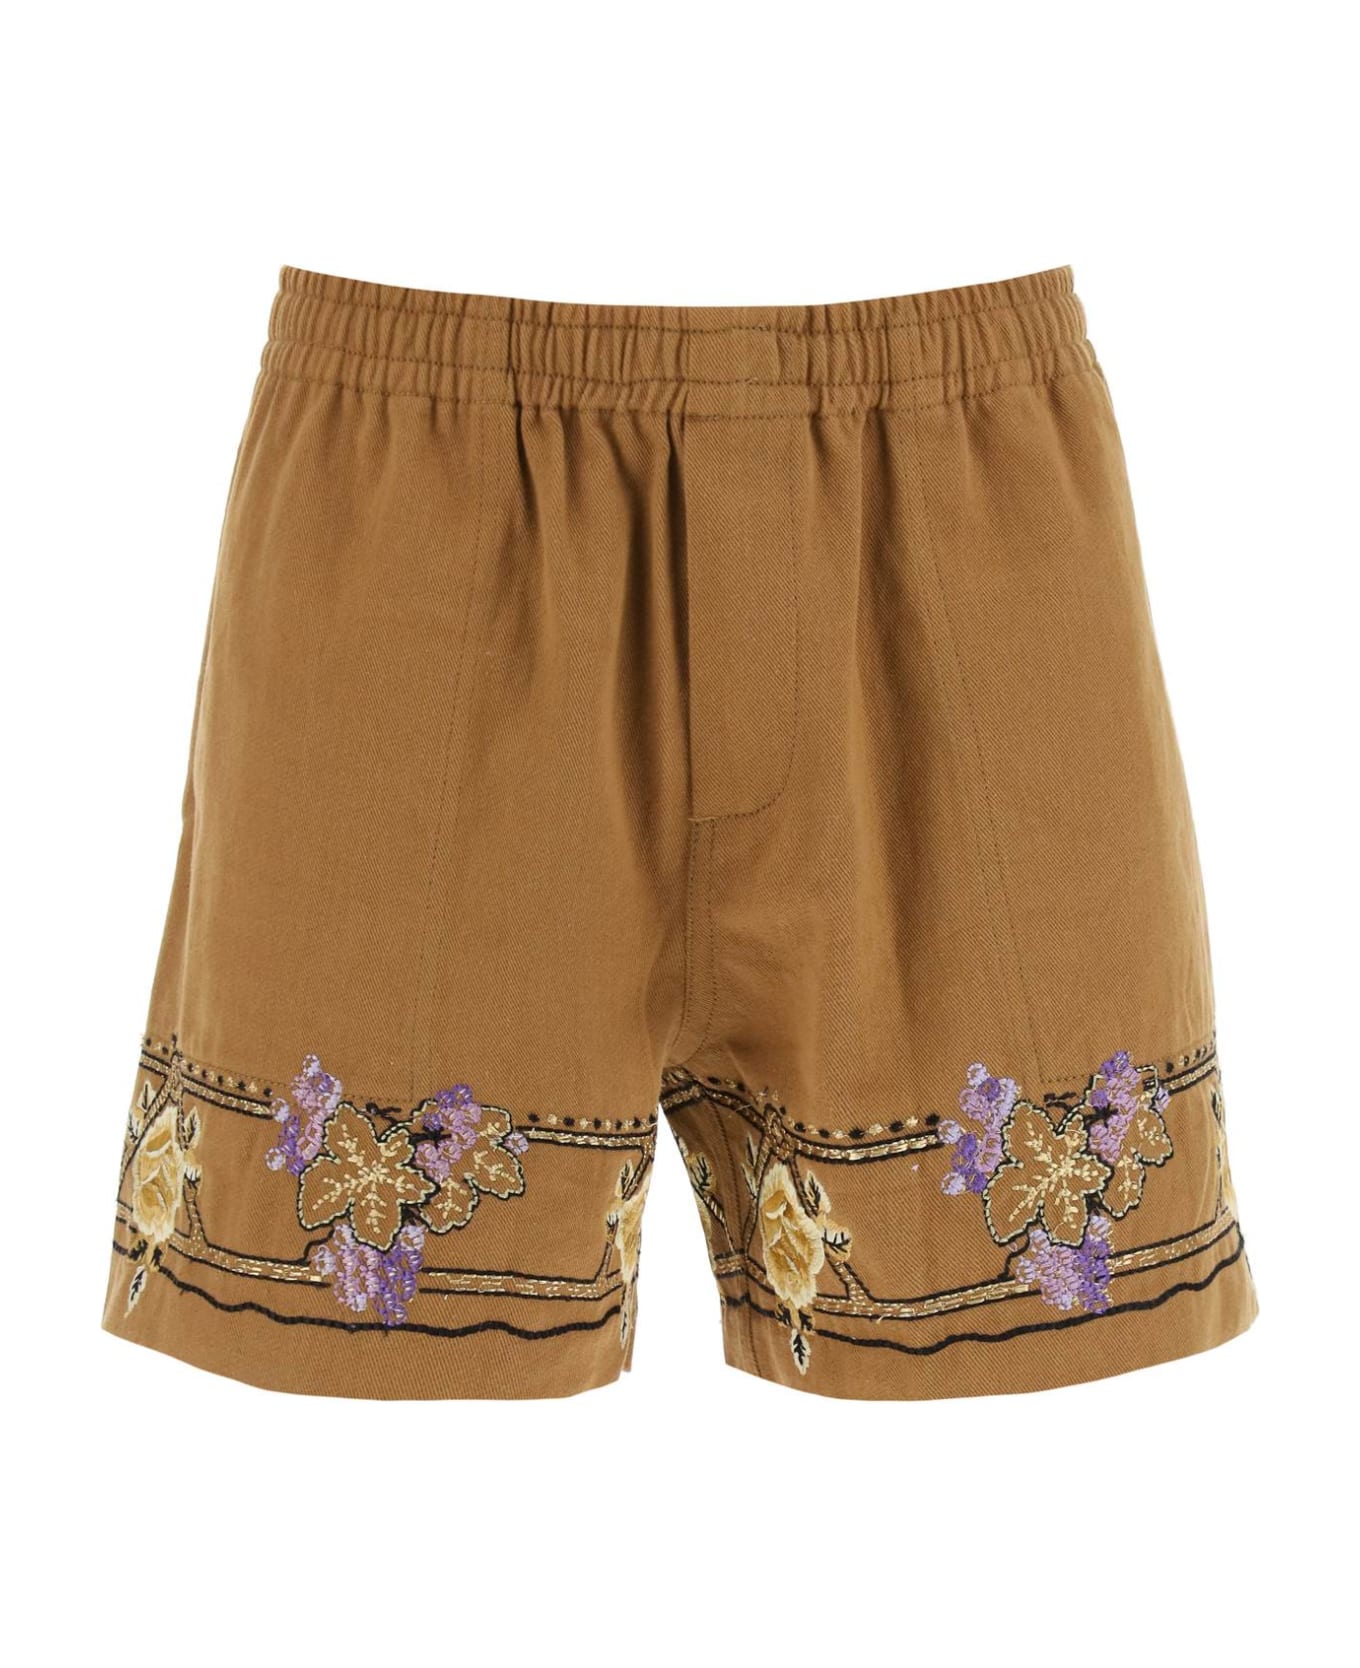 Bode Autumn Royal Shorts With Floral Embroideries - BROWN MULTI (Brown) ショートパンツ